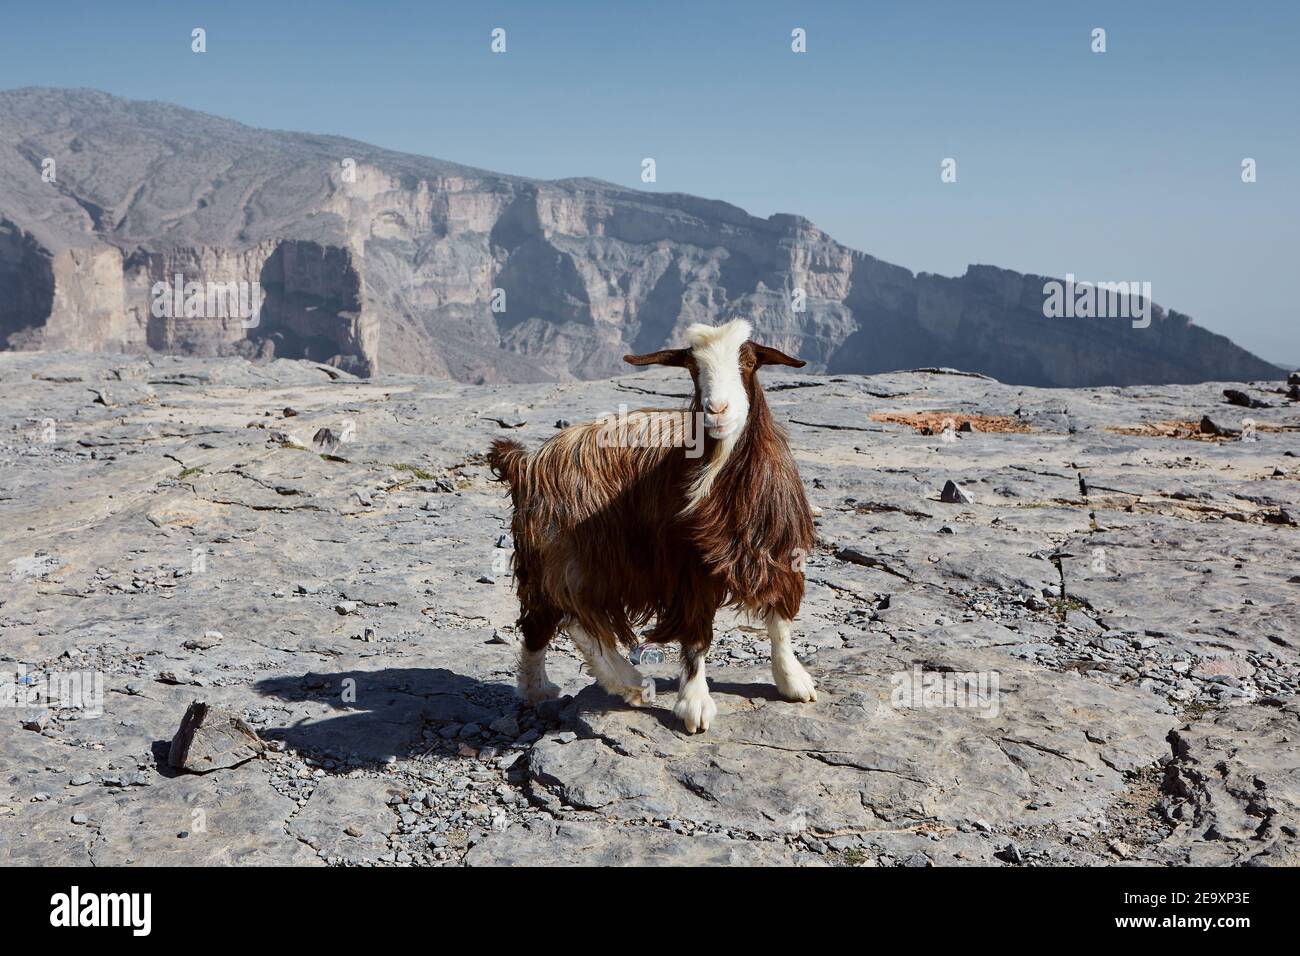 Curious goat looking at camera against mountain canyon. Jebel Shams in Oman Stock Photo